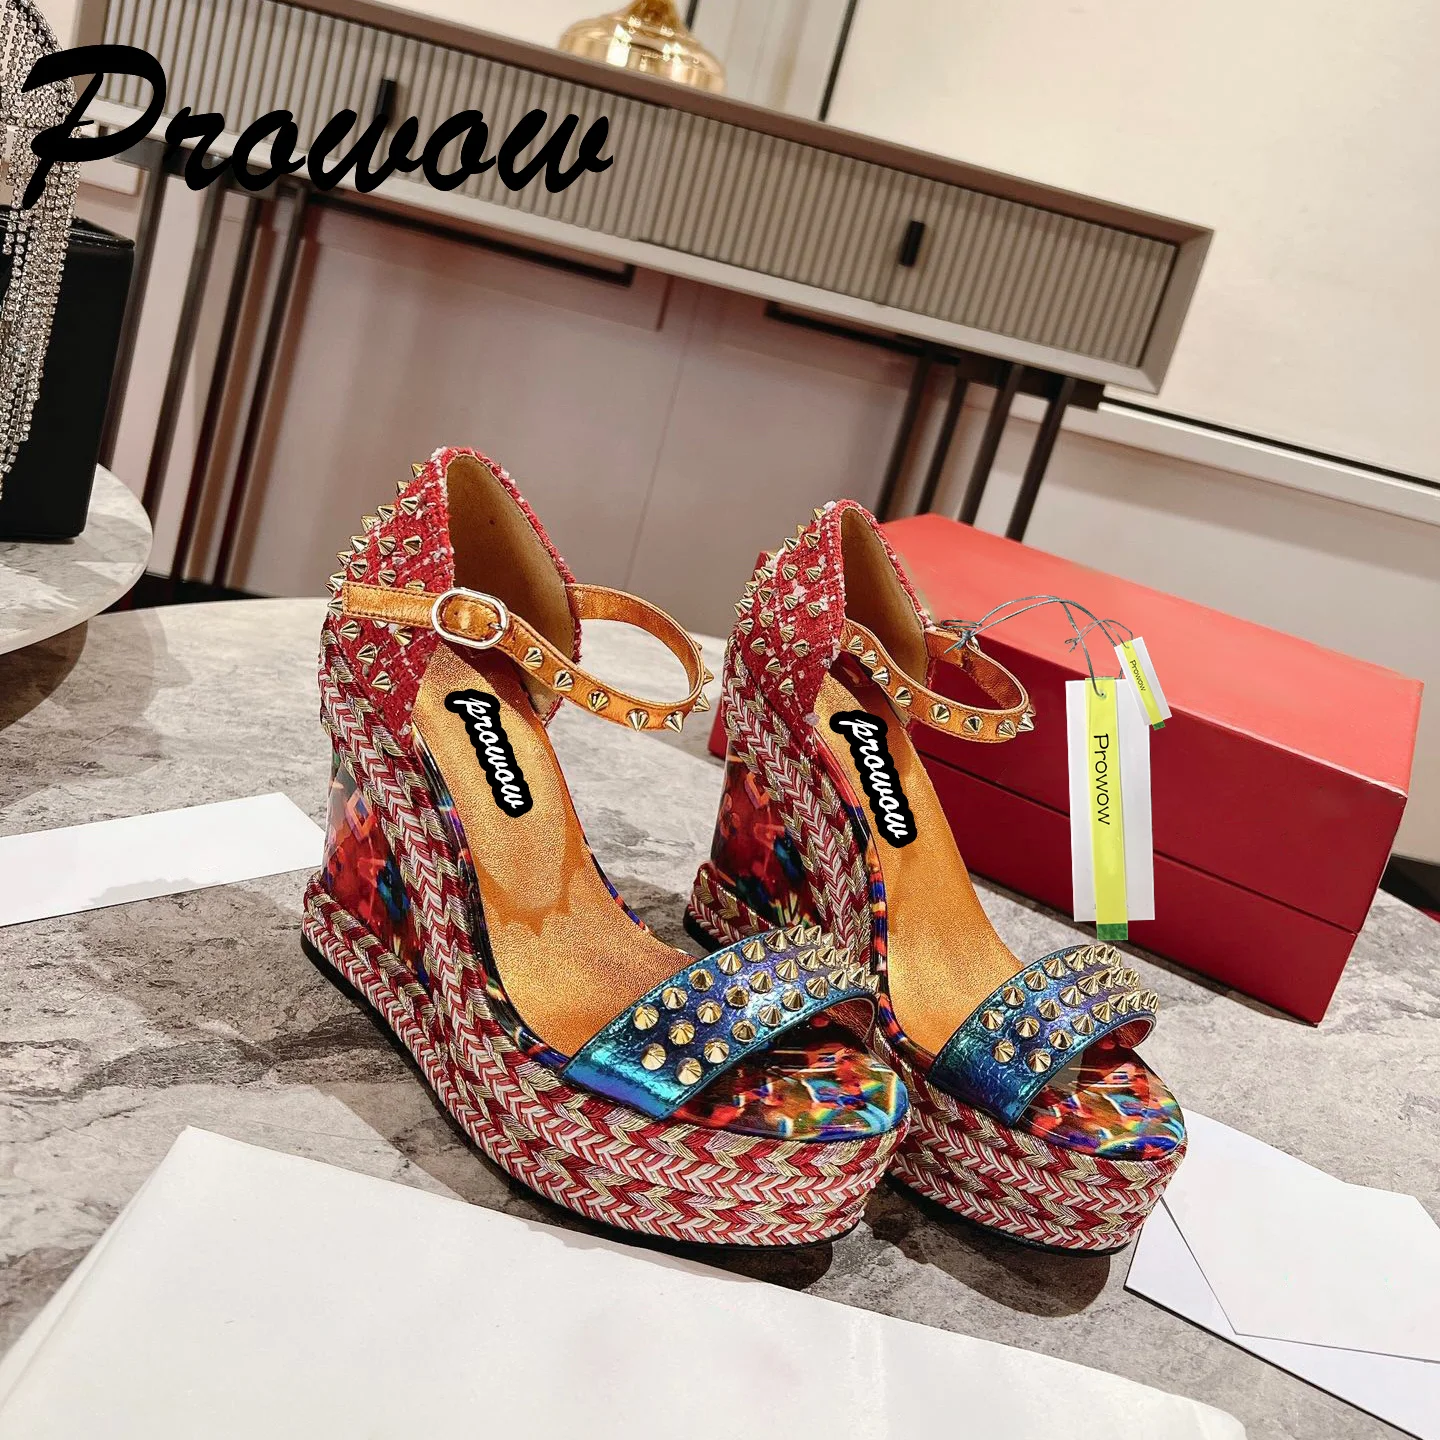 

Prowow New Spring Summer Studded Platform Leather Wedges Sandals Ankle Strappy Female Spring Summer Vacation Beach Sandals